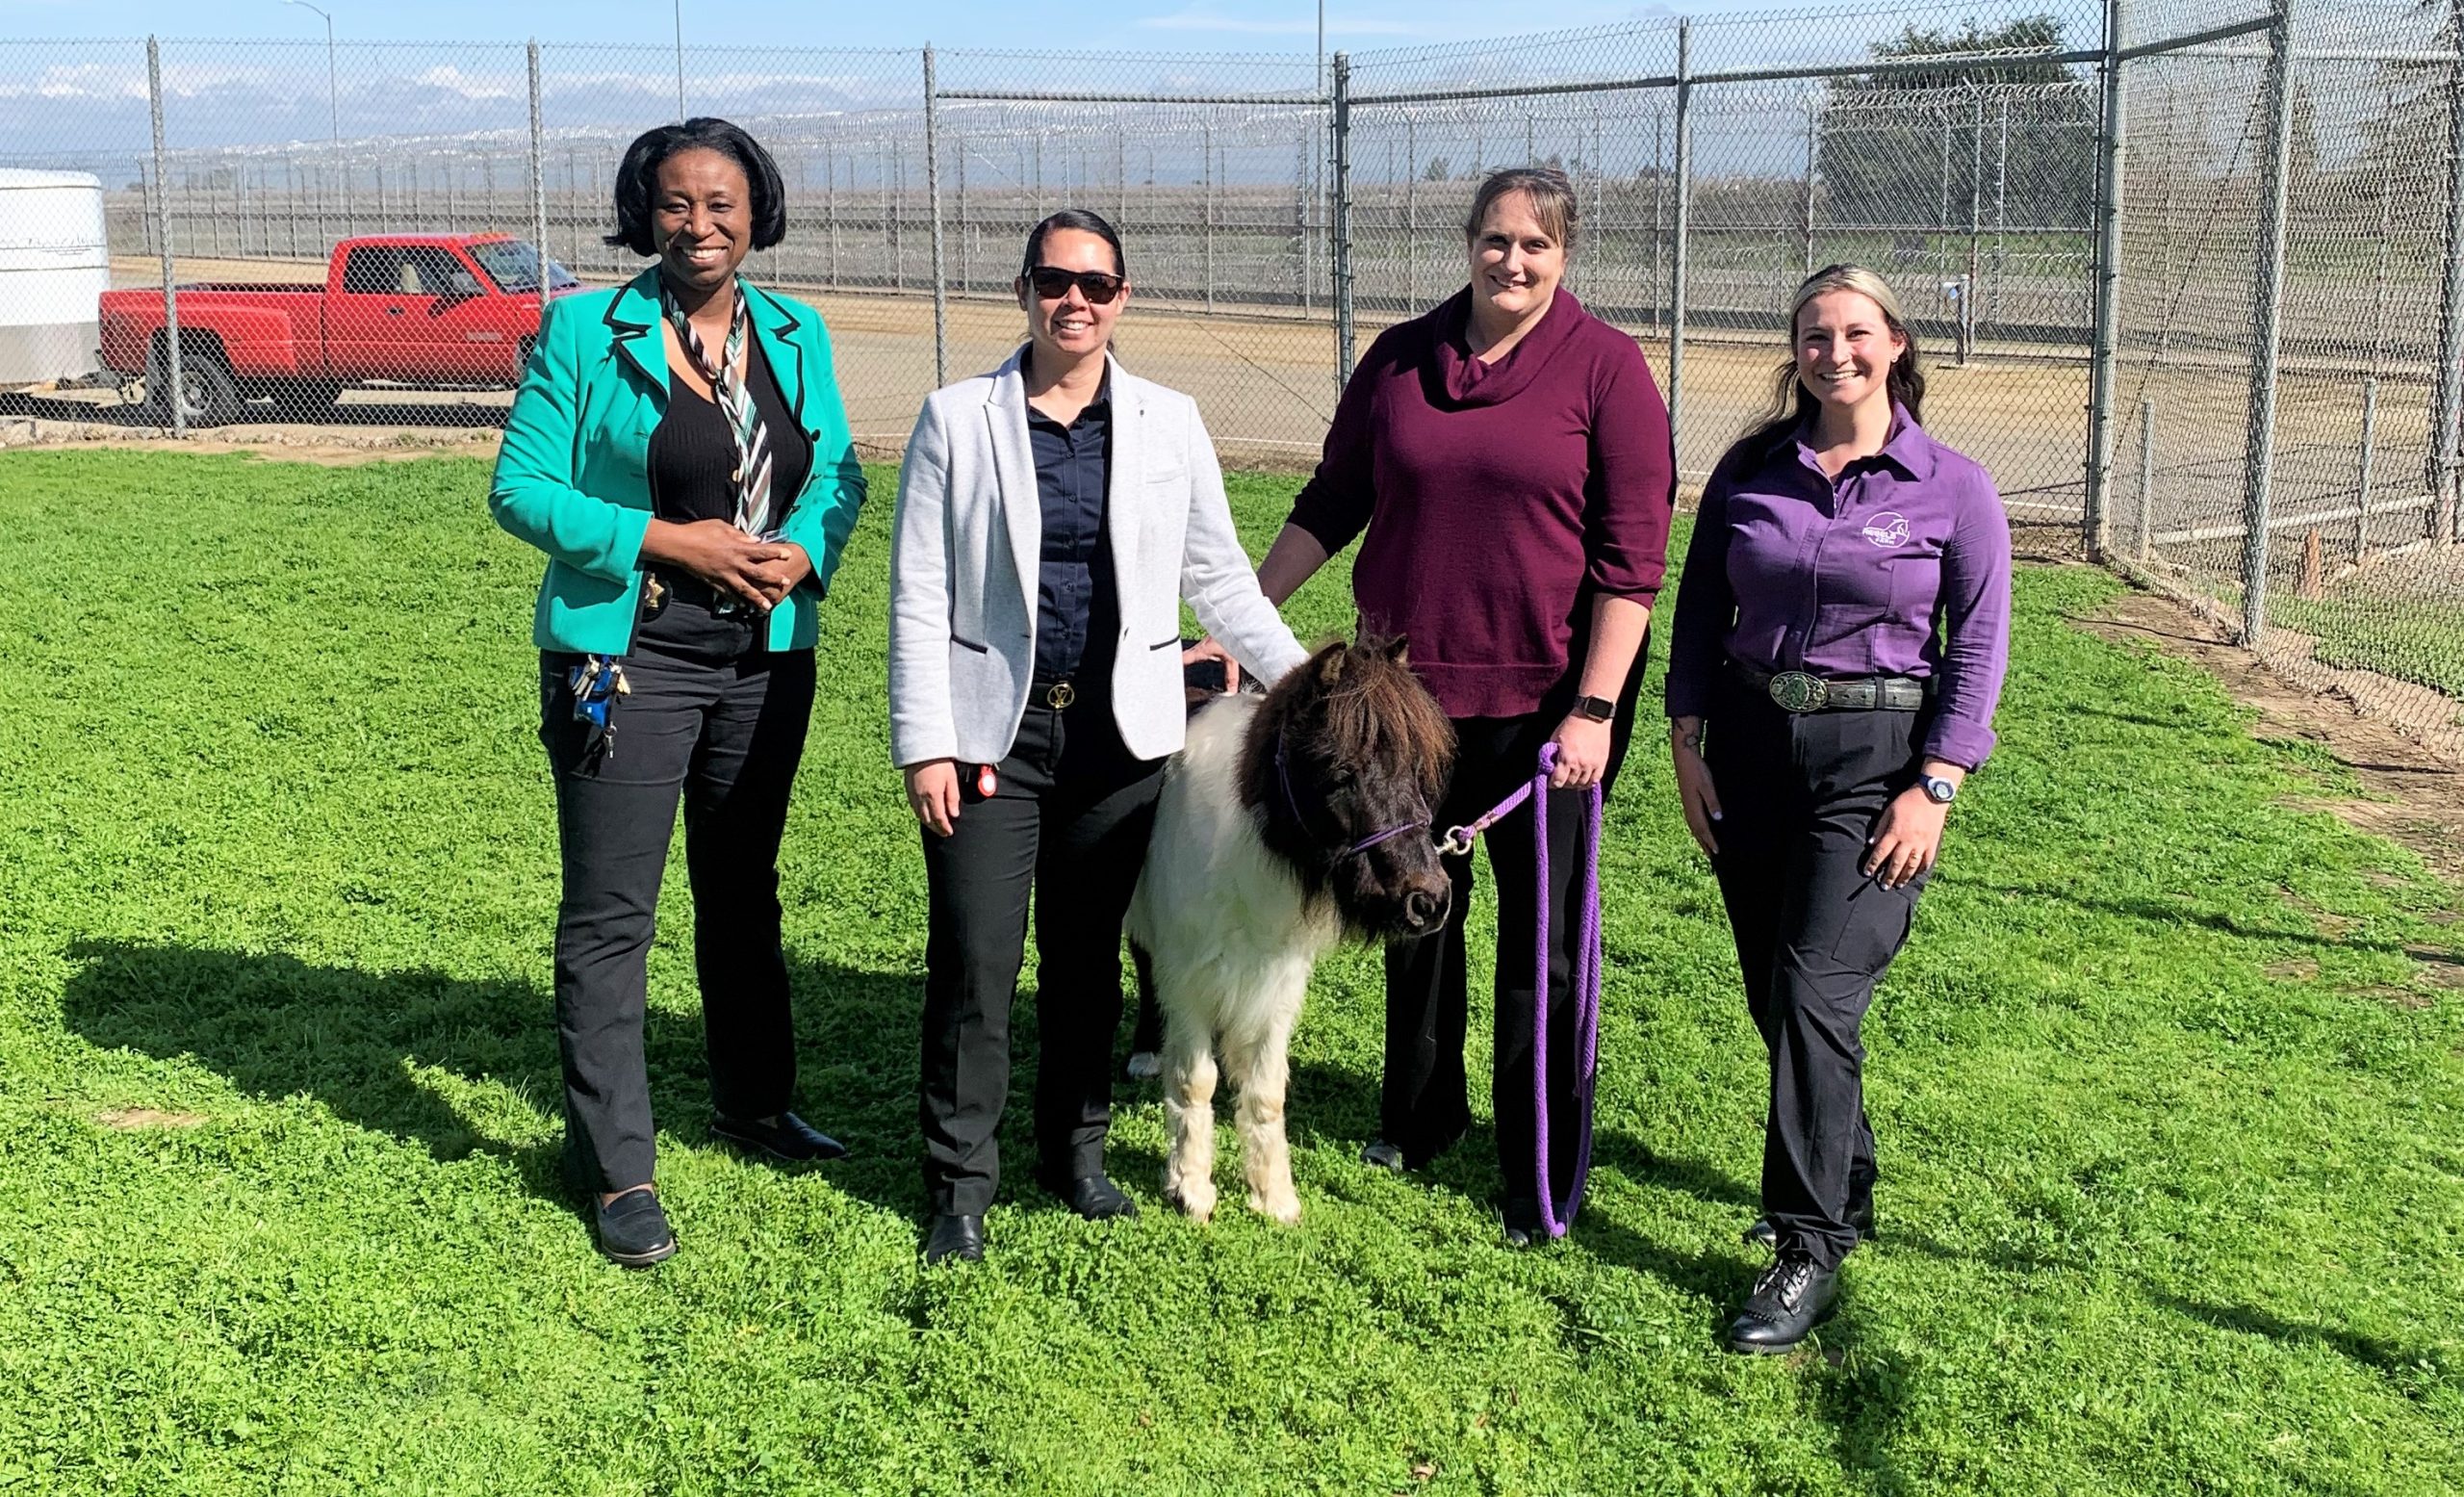 Four women with a pony from Rebel Farms standing in a prison yard.